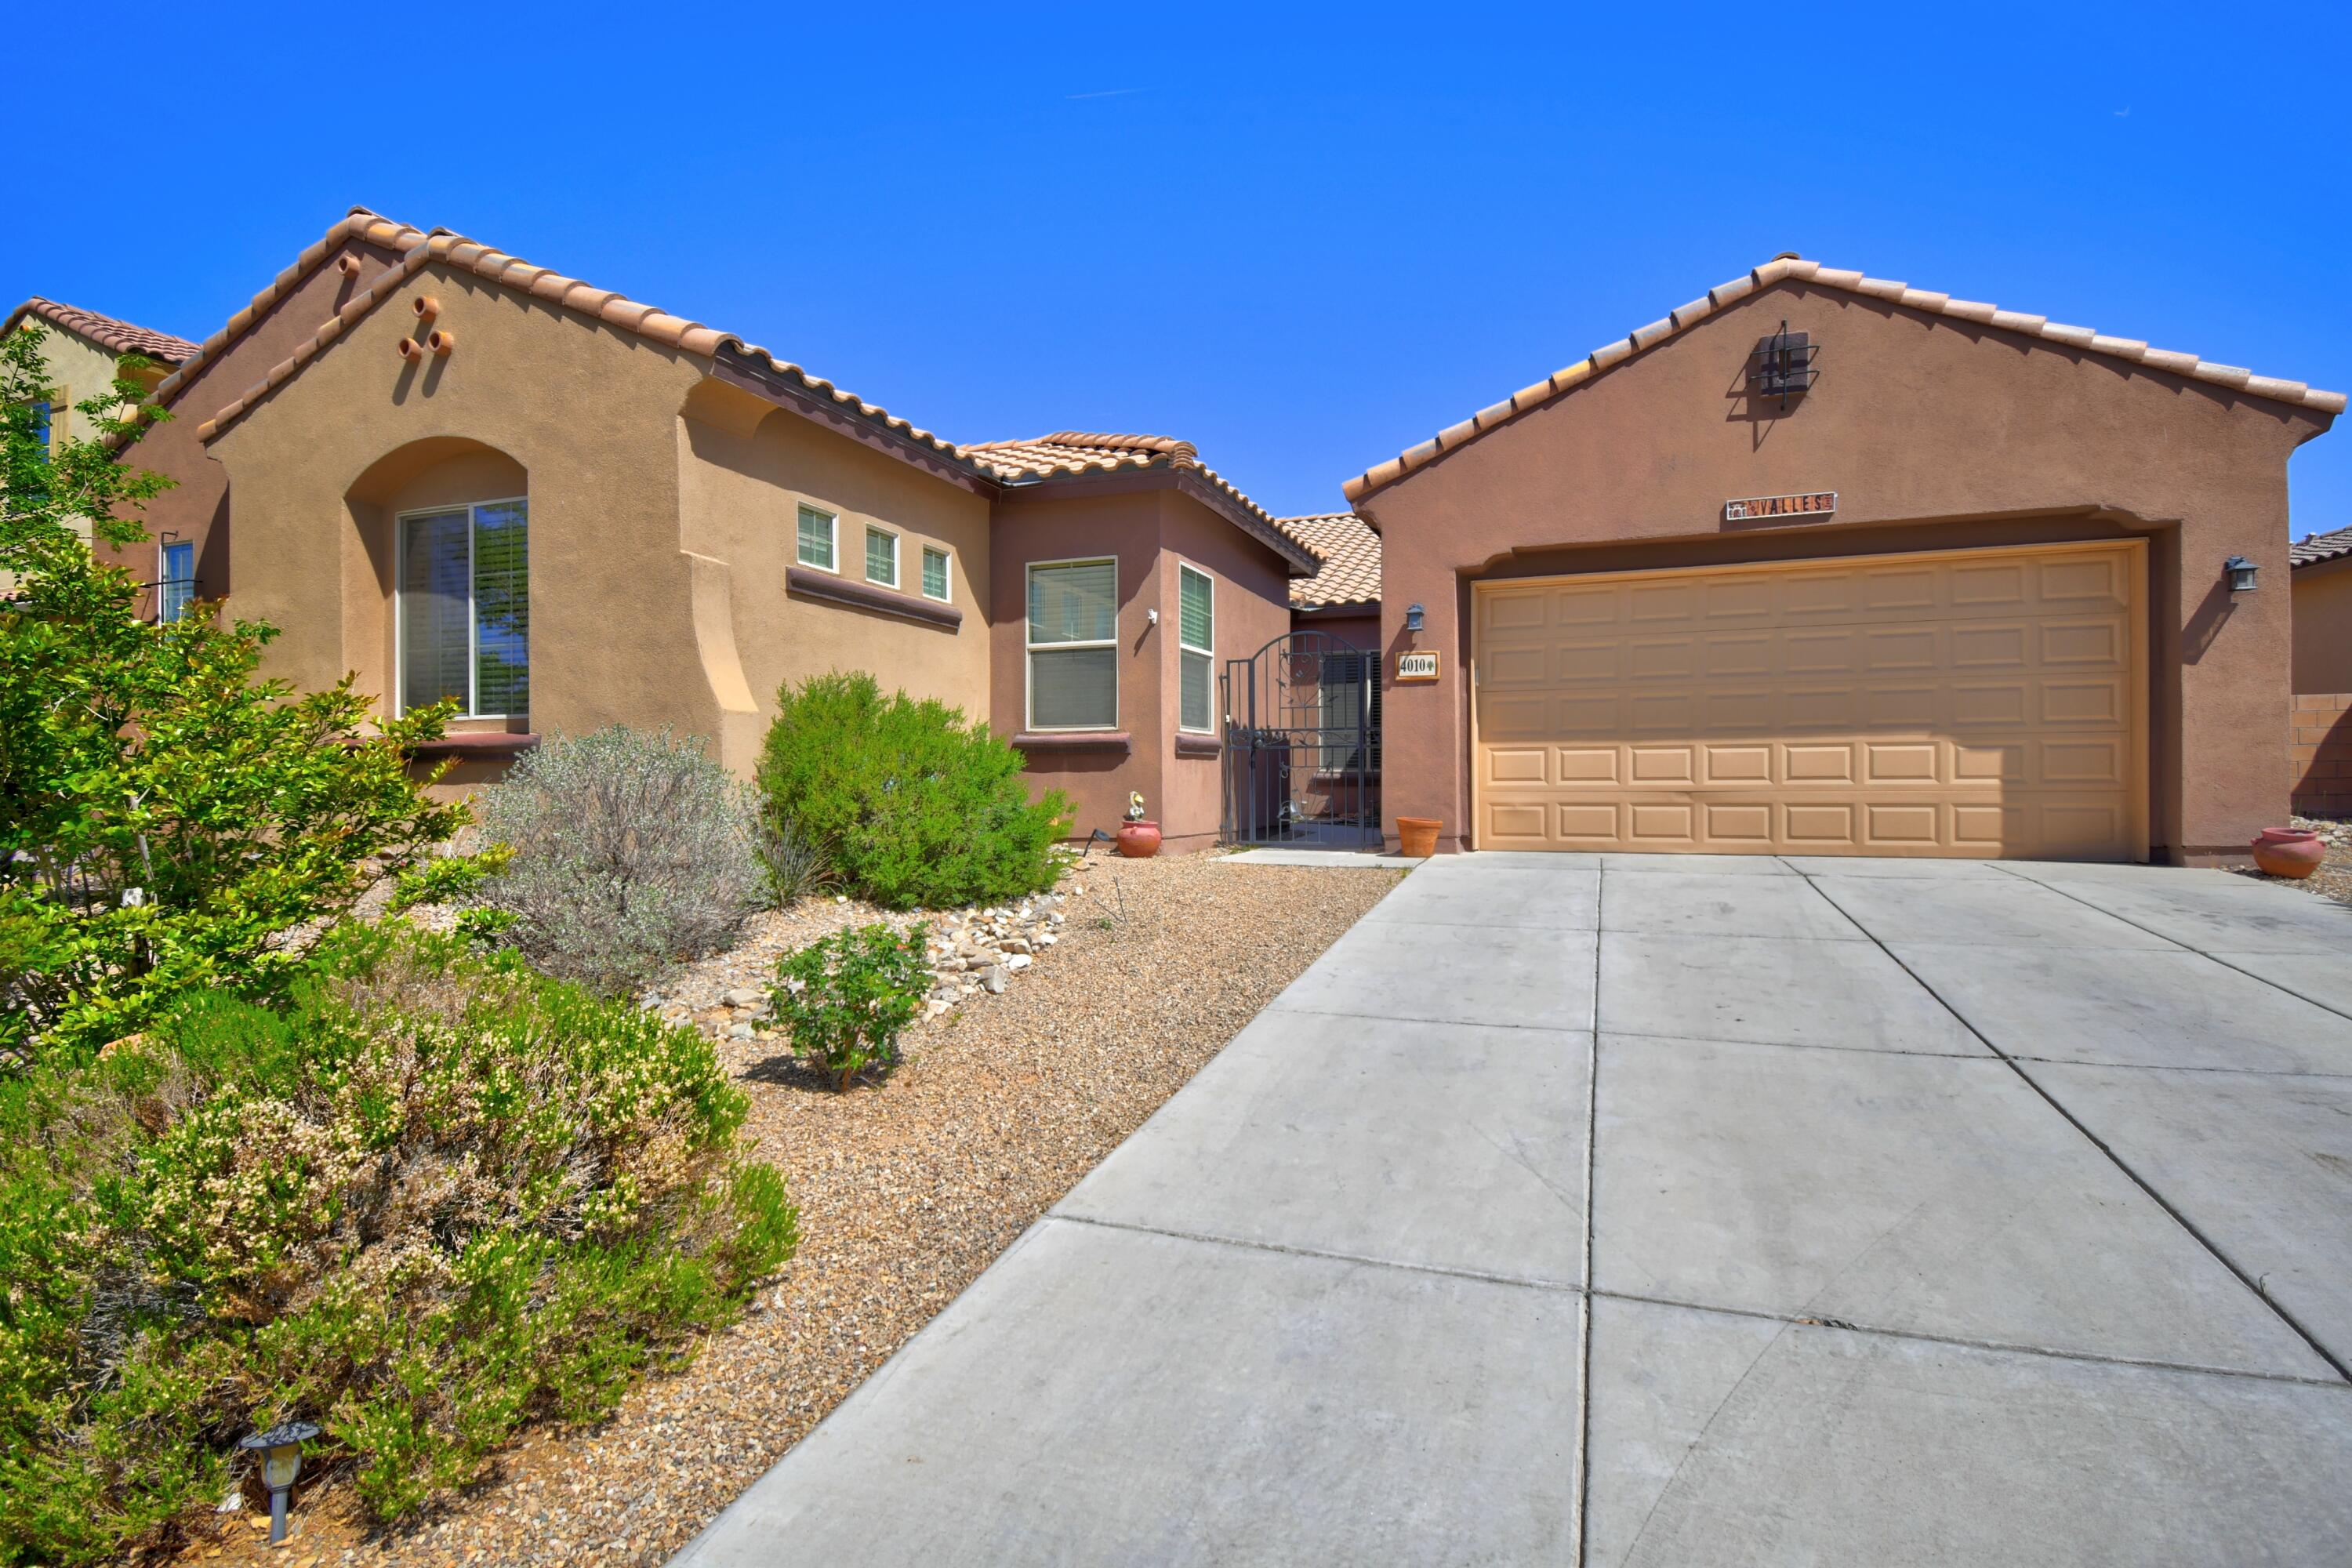 Beautiful home in a gated community in the Loma Colorado neighborhood. Large floorplan with great room and In-law suite. Granite countertops and spacious island in the kitchen. Large walk-in closet in the owner suite. if you're looking for space to grow this house is for you. It's a must see.